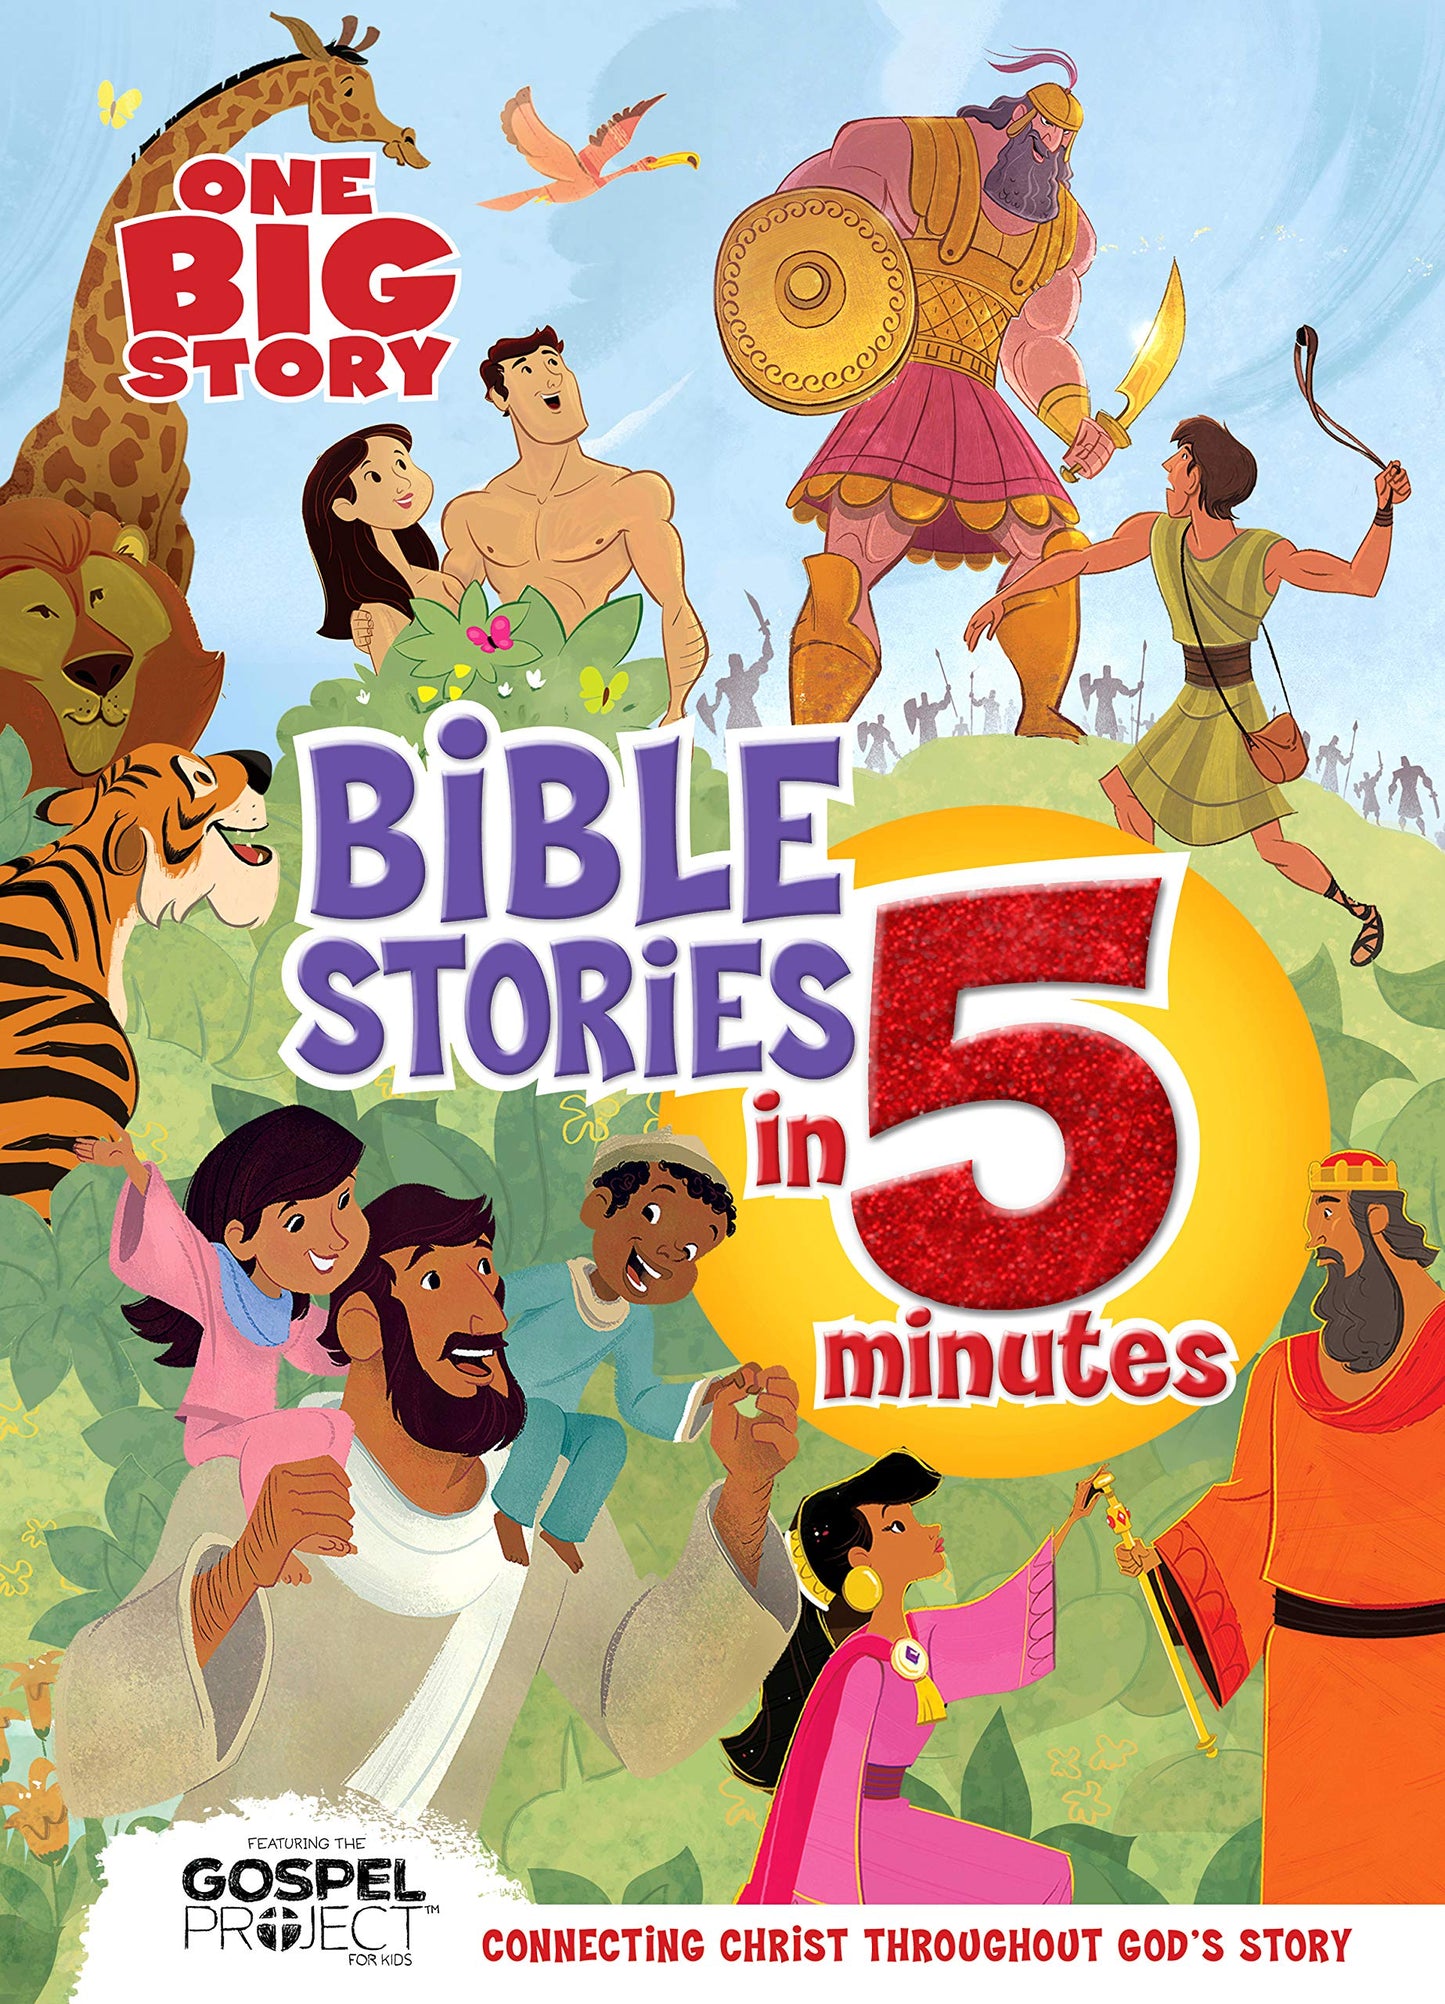 One Big Story Bible Stories in 5 Minutes: Connecting Christ Throughout God's Story